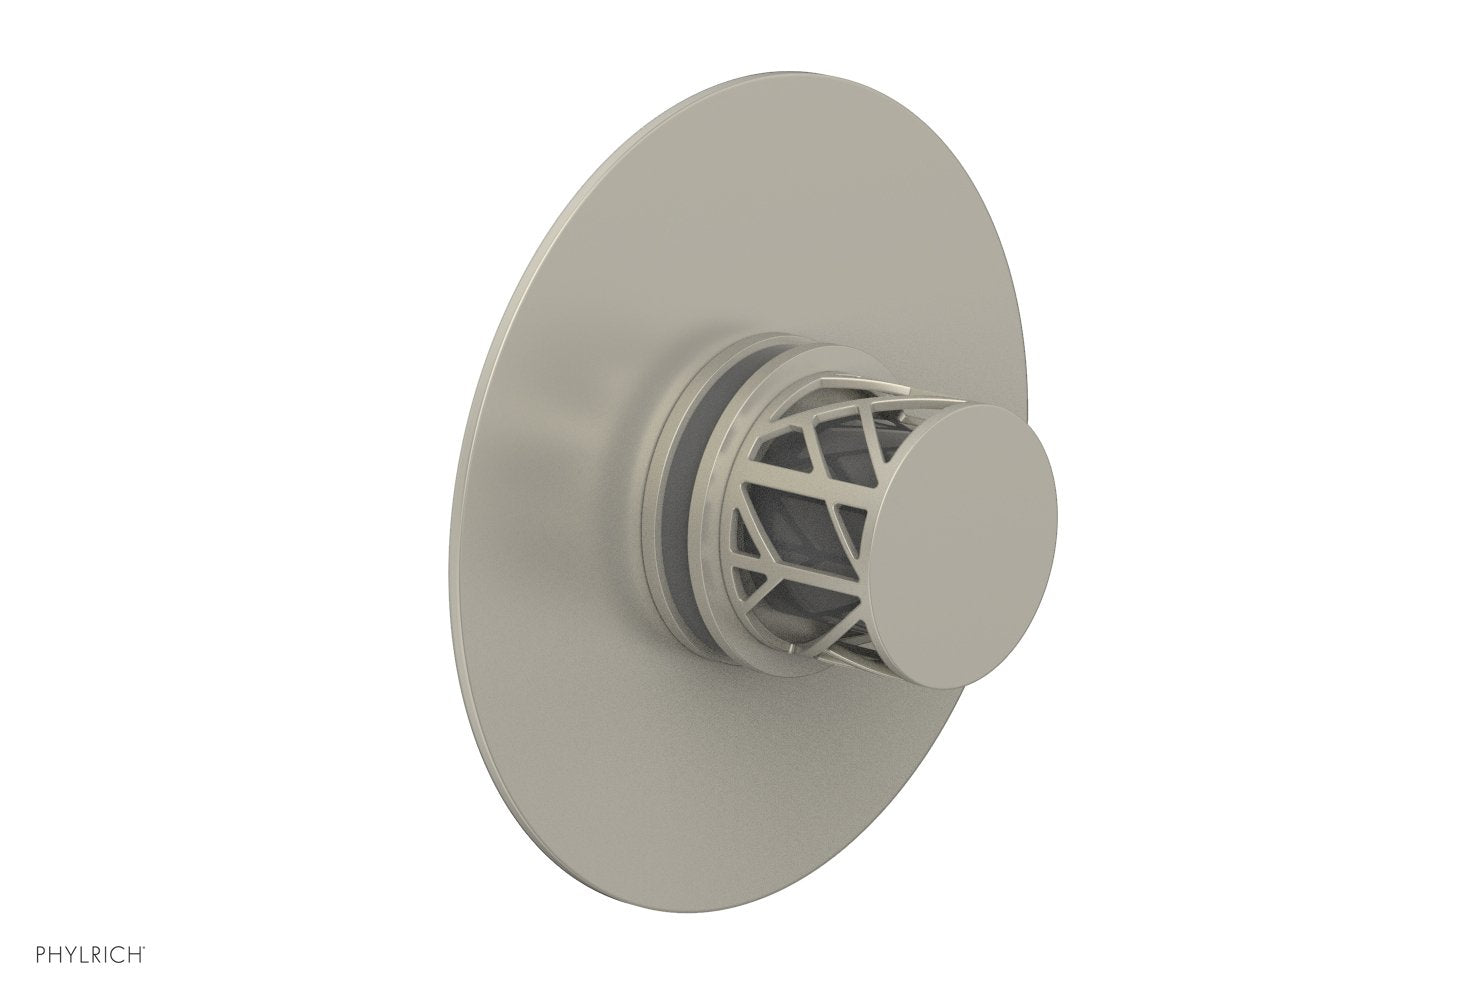 Phylrich JOLIE Pressure Balance Shower Plate & Handle Trim, Round Handle with "Grey" Accents